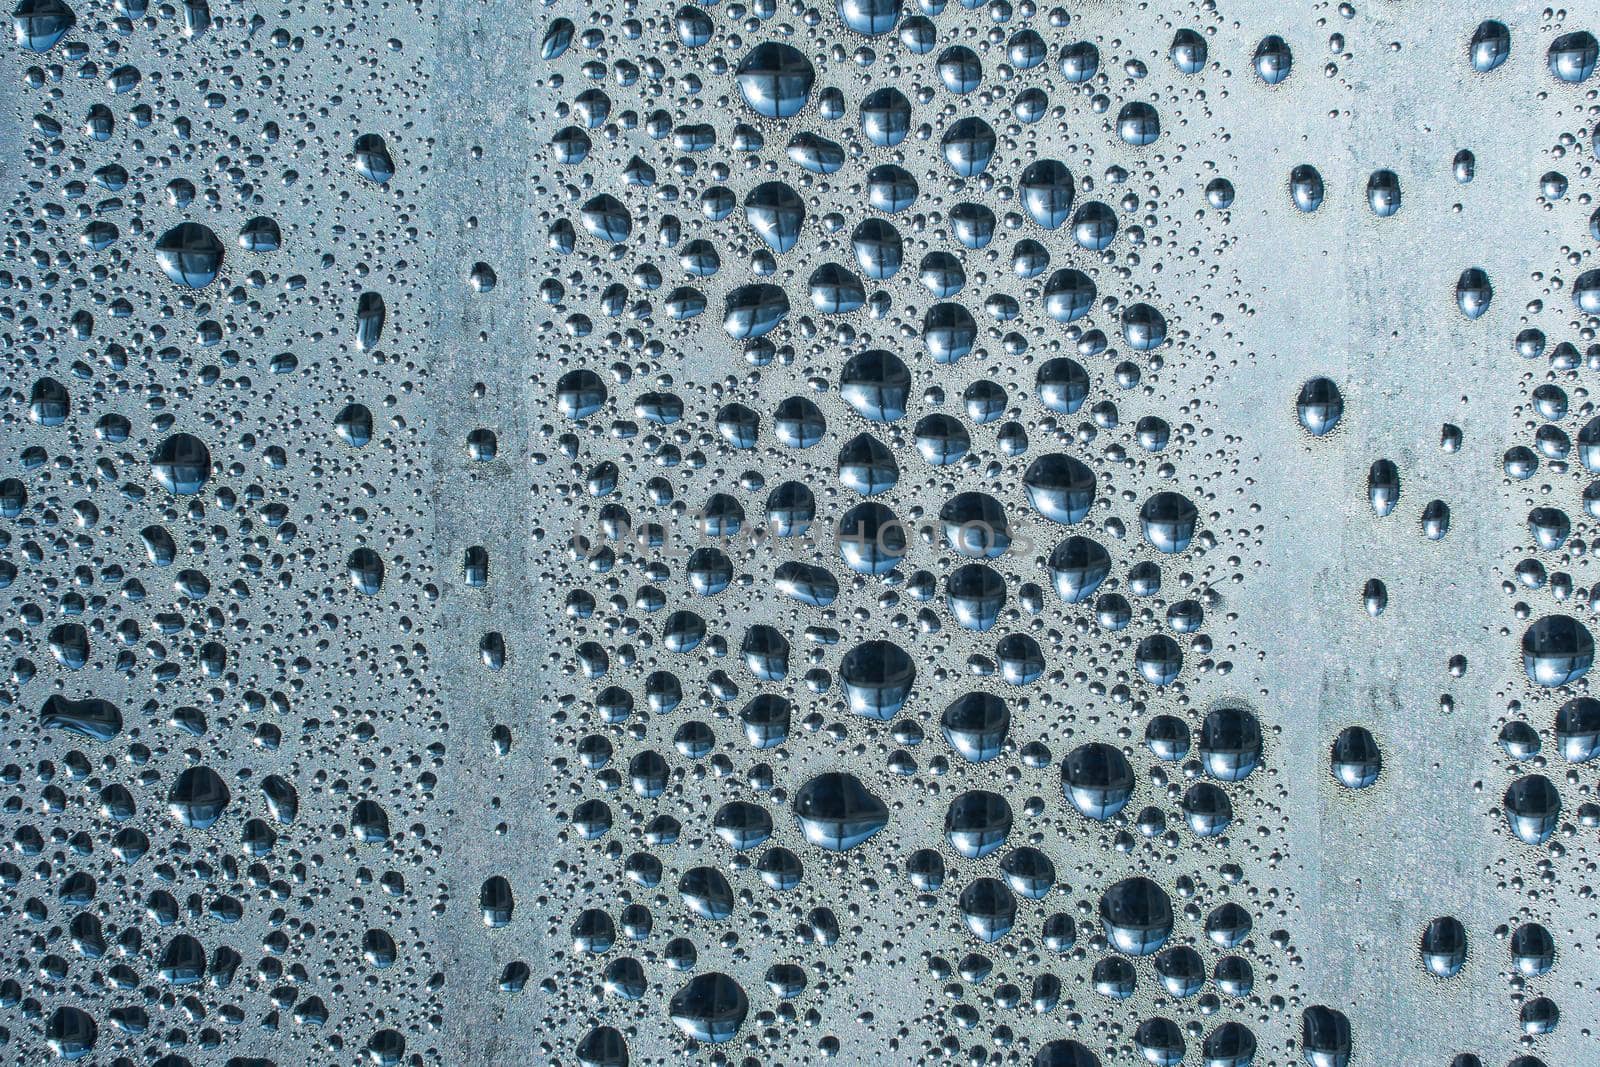 Raindrops on the glass in rainy weather.The glittering, shiny surface of water on glass.Water drops in the form of balls or spheres.Blue raindrops background. Abstract backgrounds ornament with water